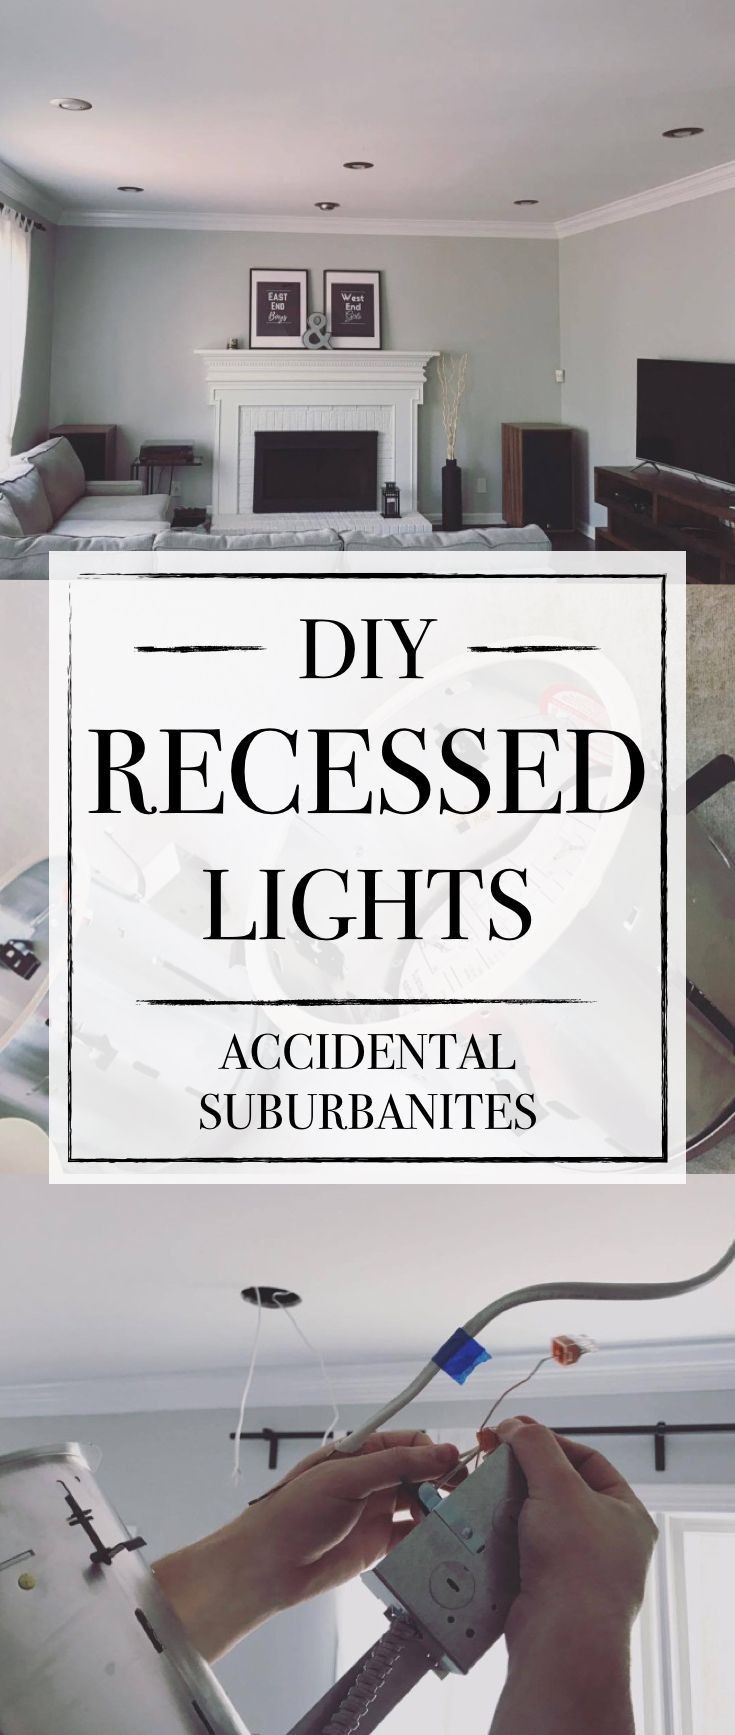 DIY Recessed Lighting how to install recessed lights with no attic access convert existing